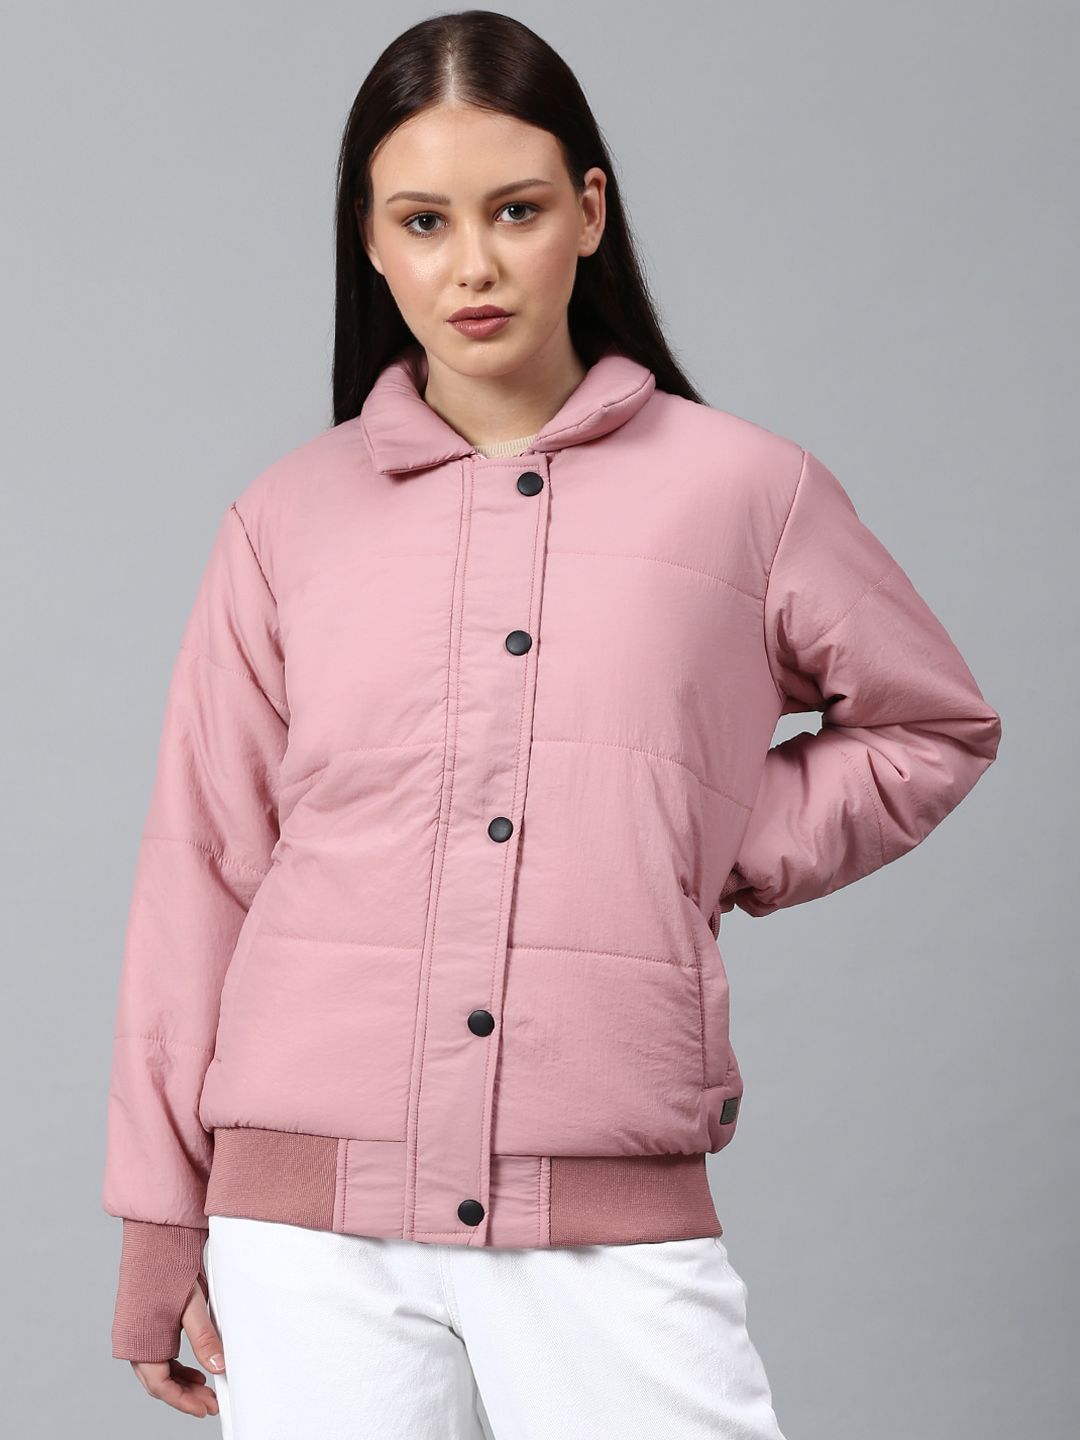 Campus Sutra Women Pink Windcheater Outdoor Bomber Jacket Price in India